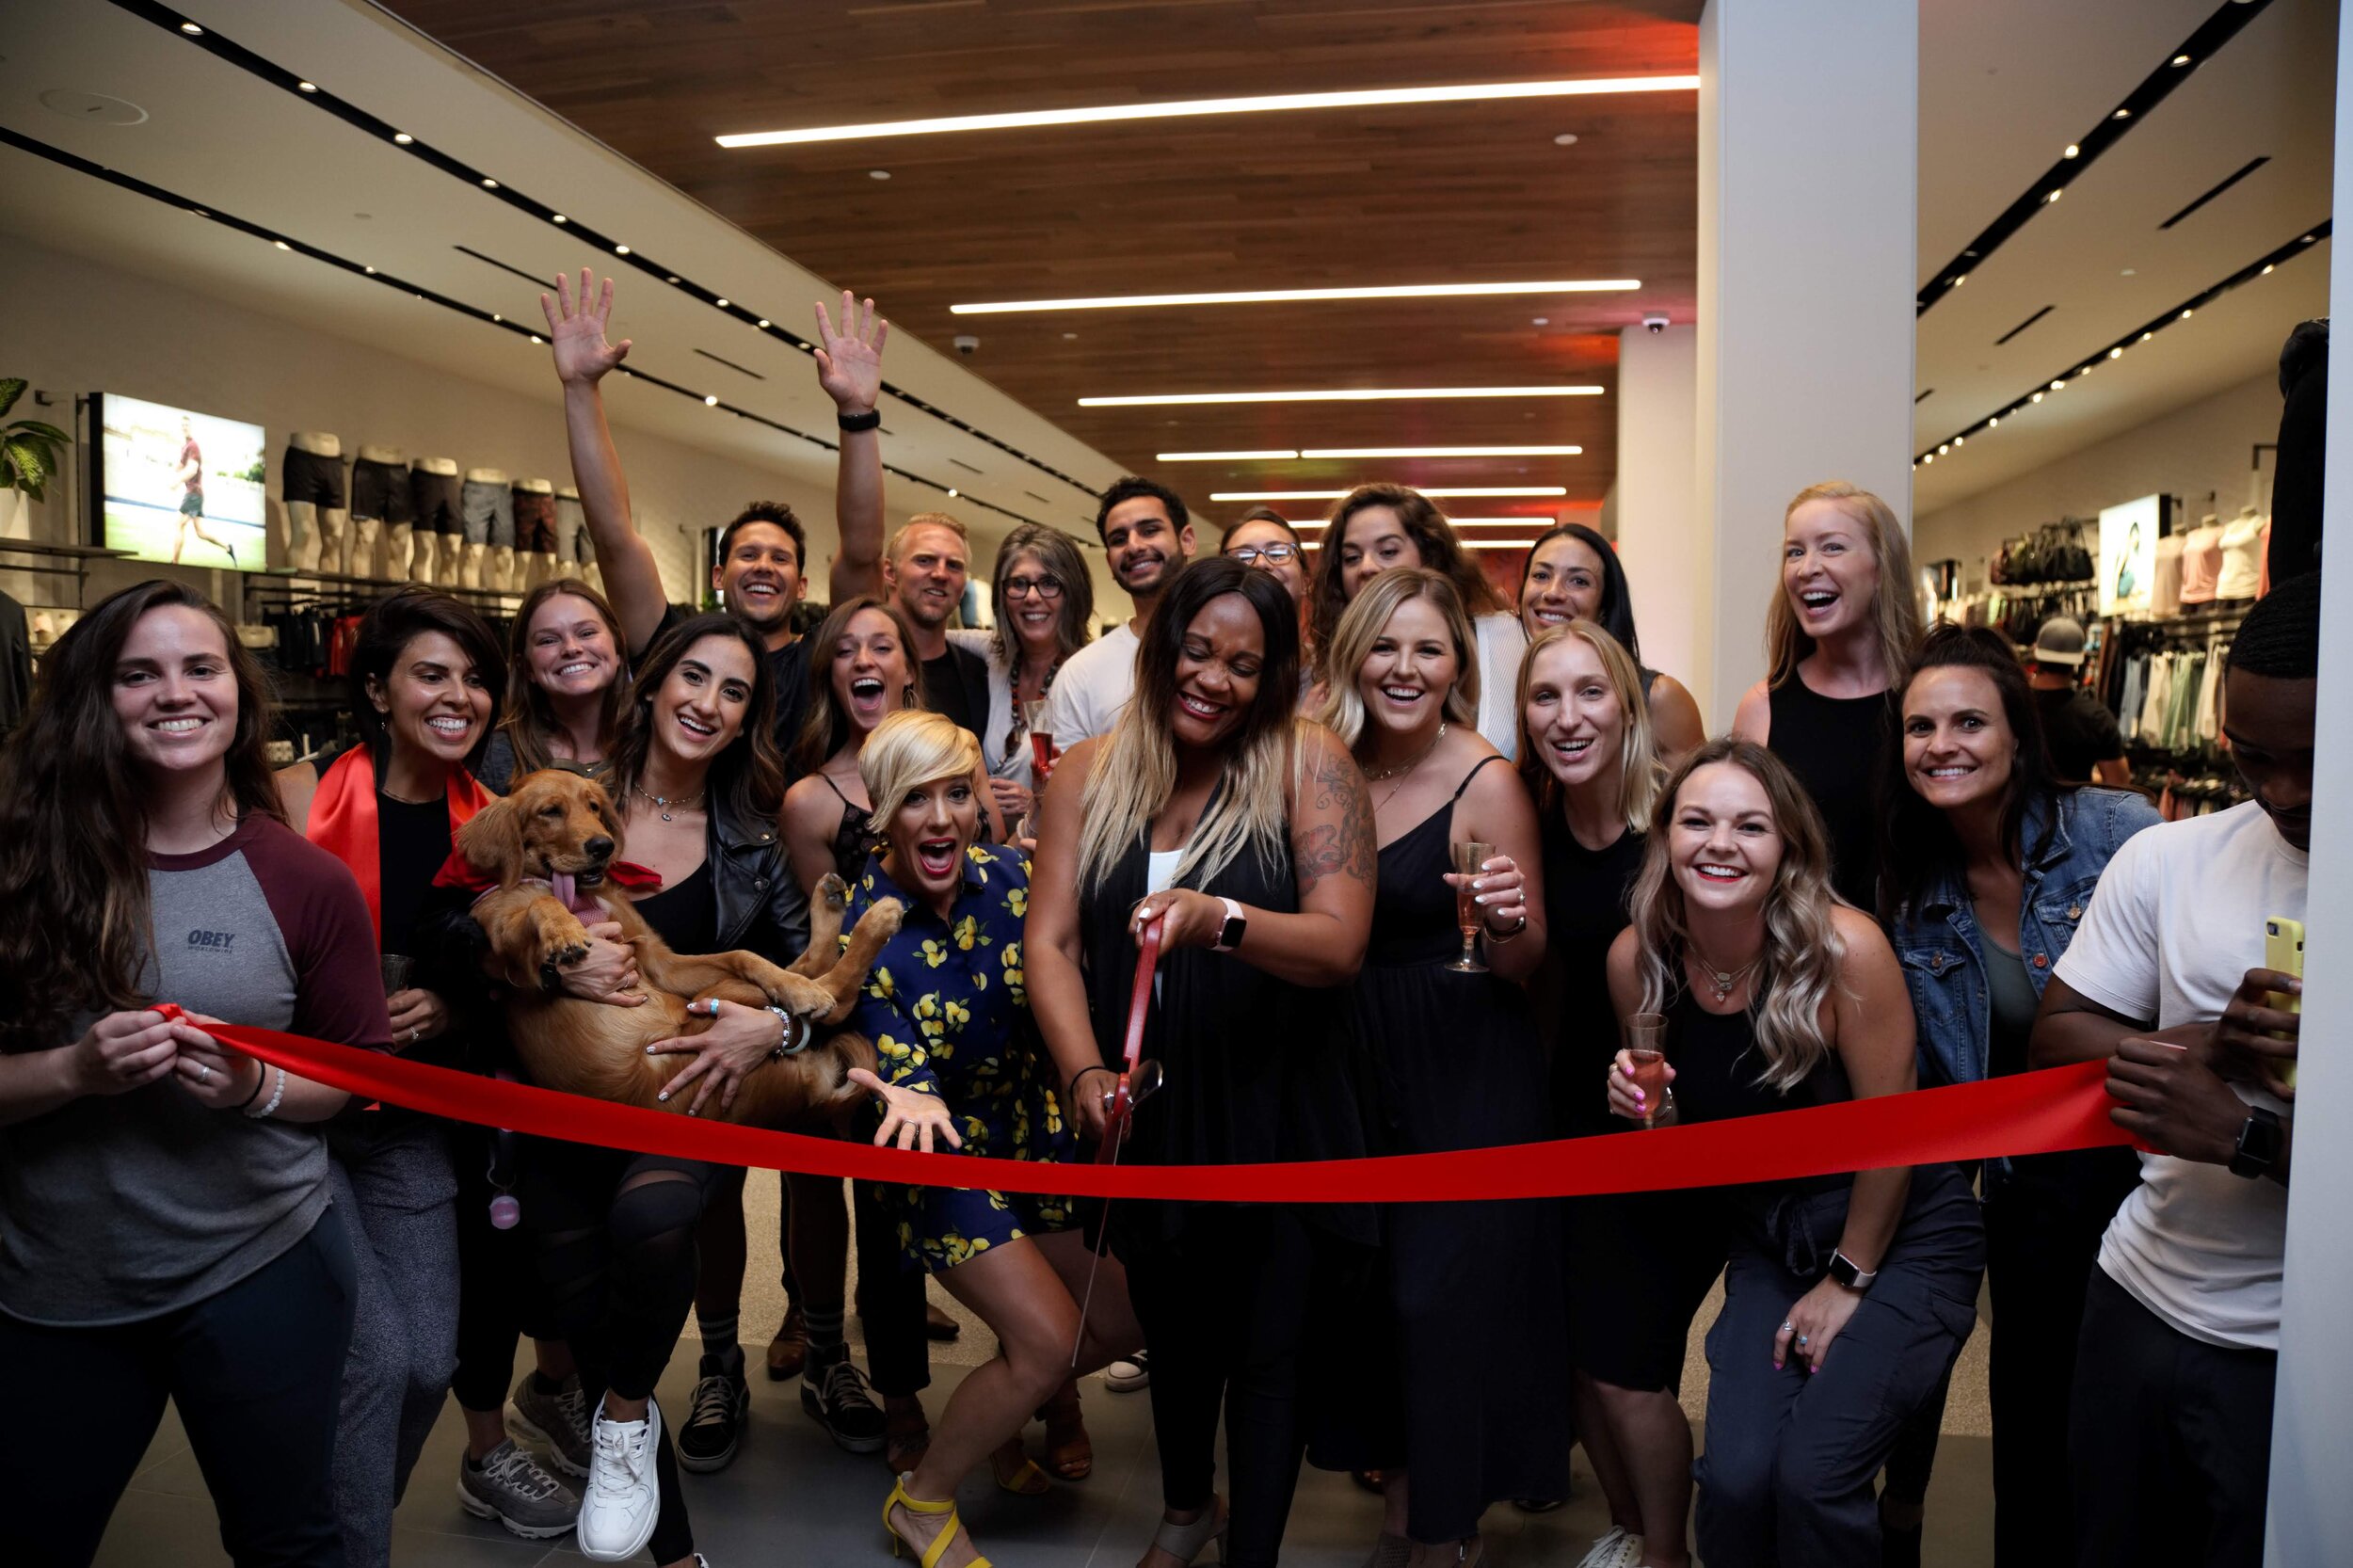 Lululemon Fashion Valley Celebrates New Space with In Store Party